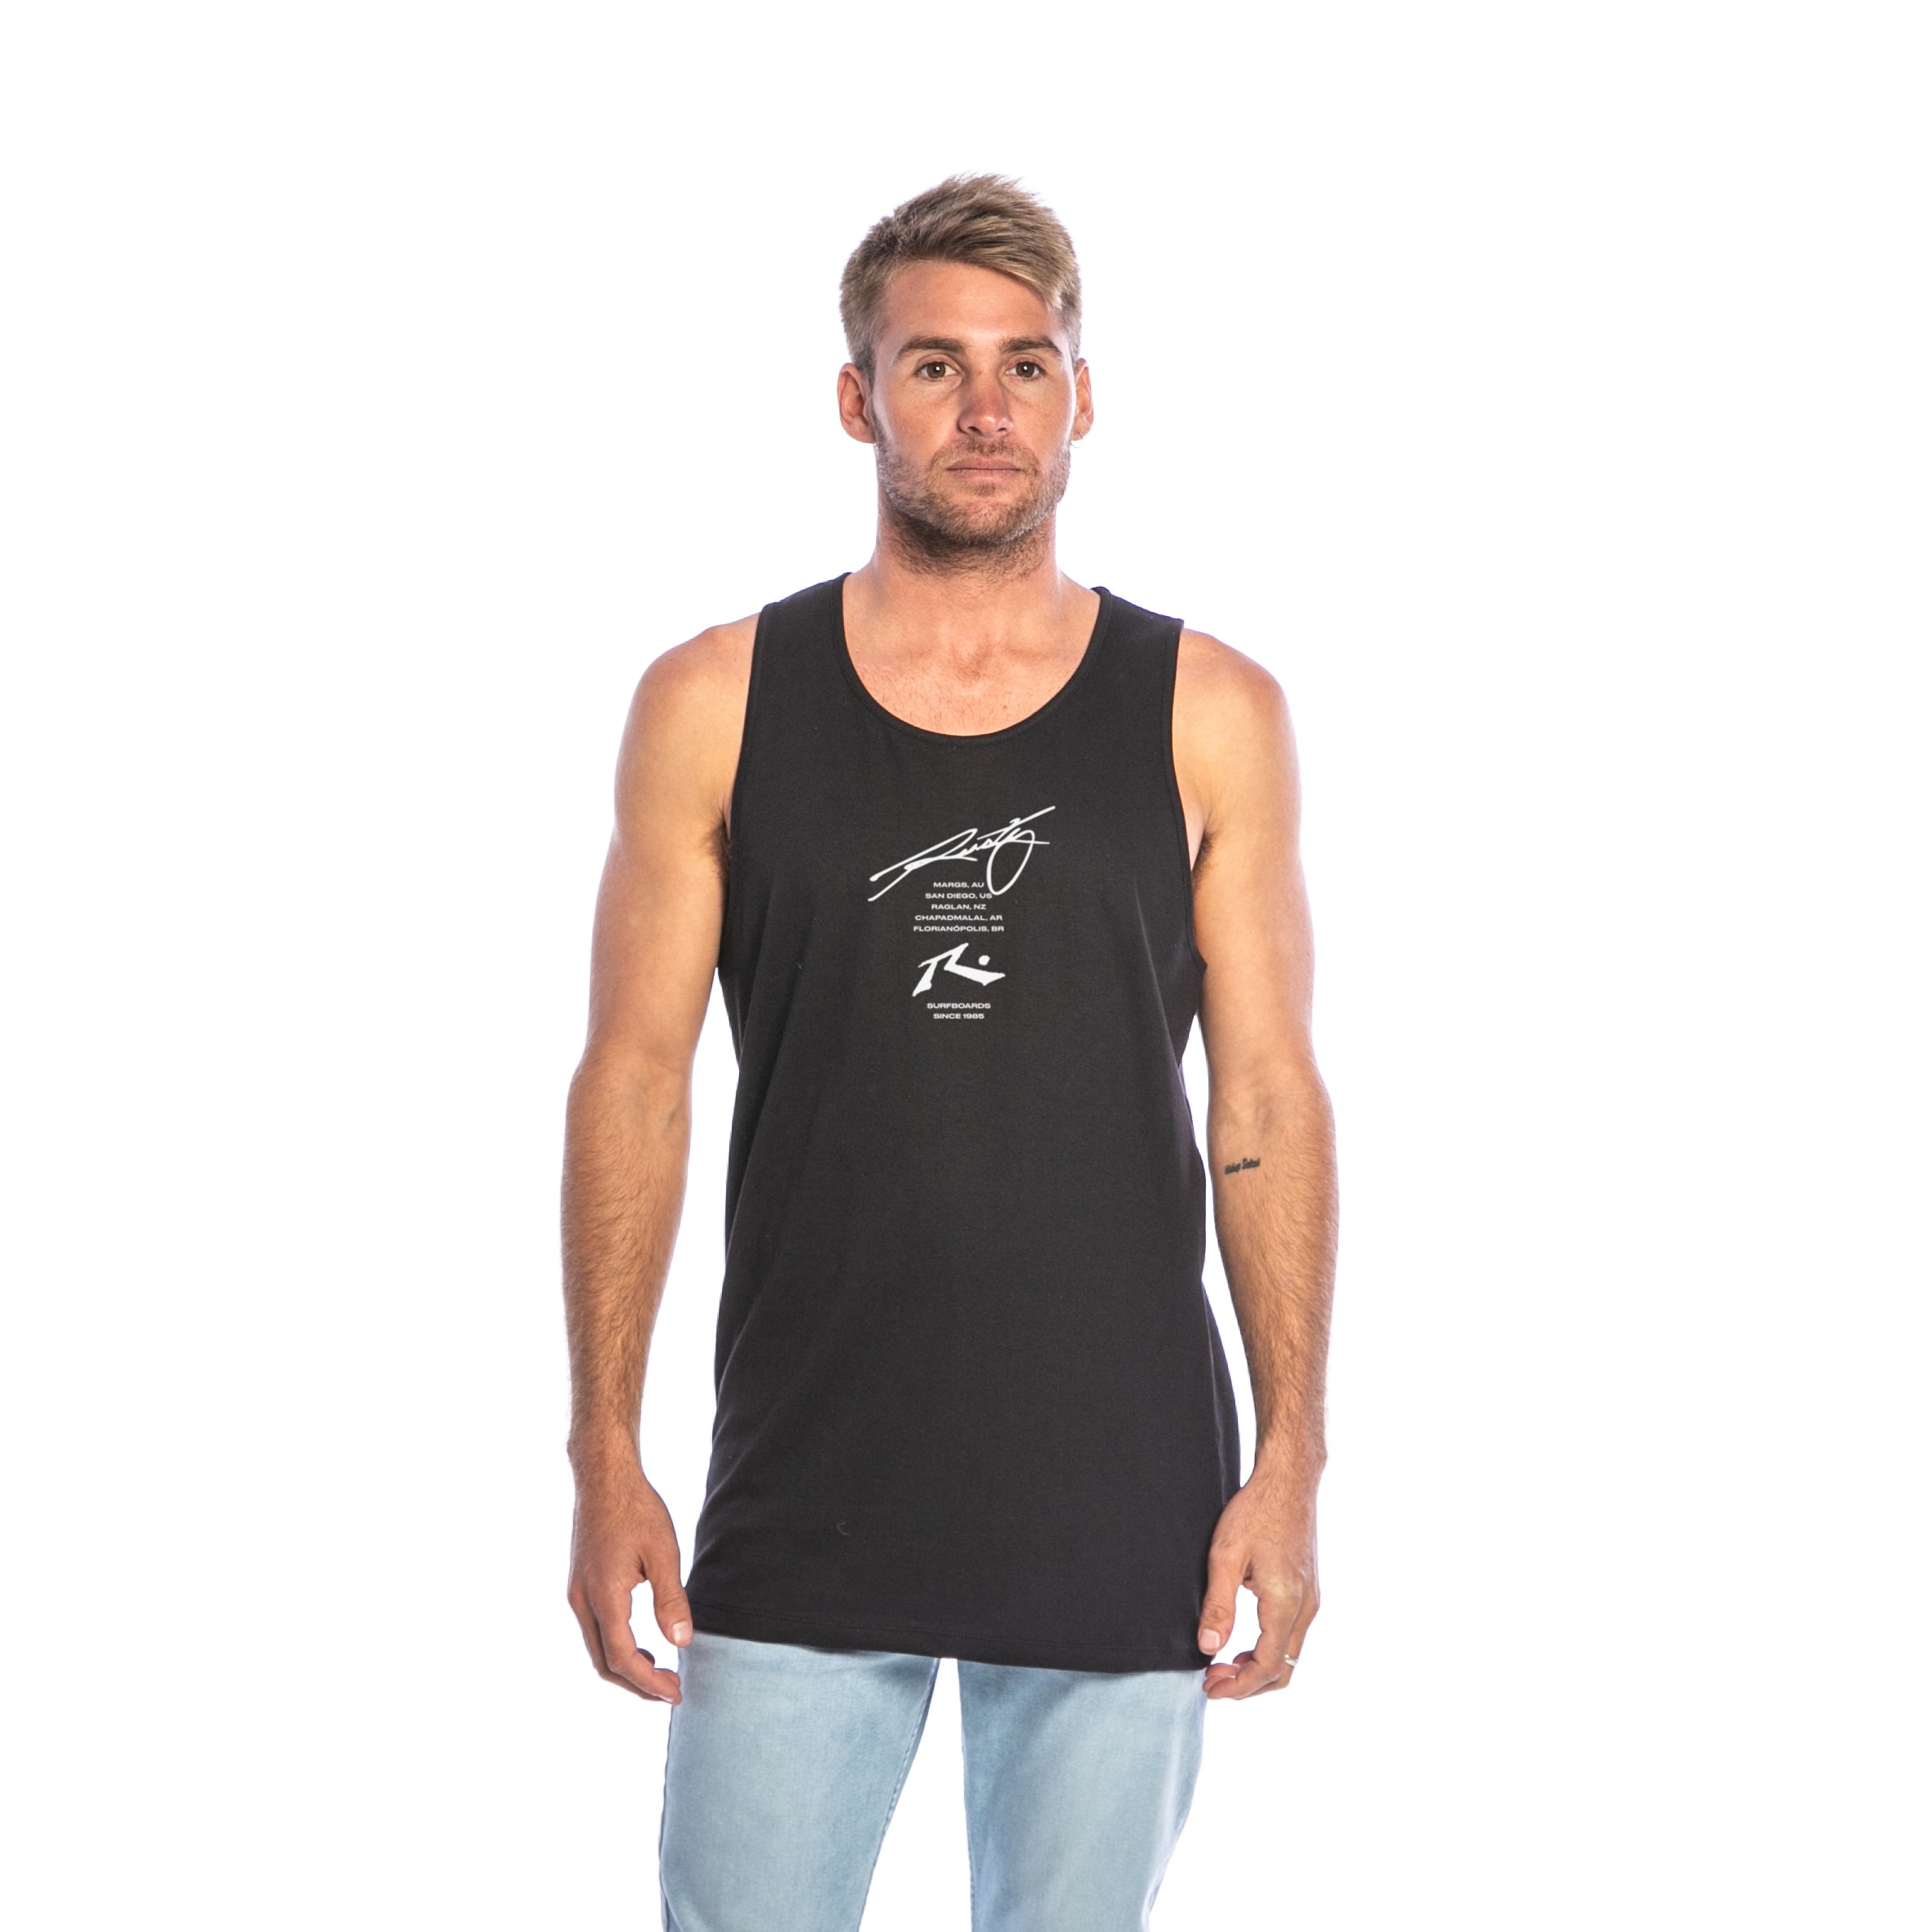 Musculosa Surfpoint  Black